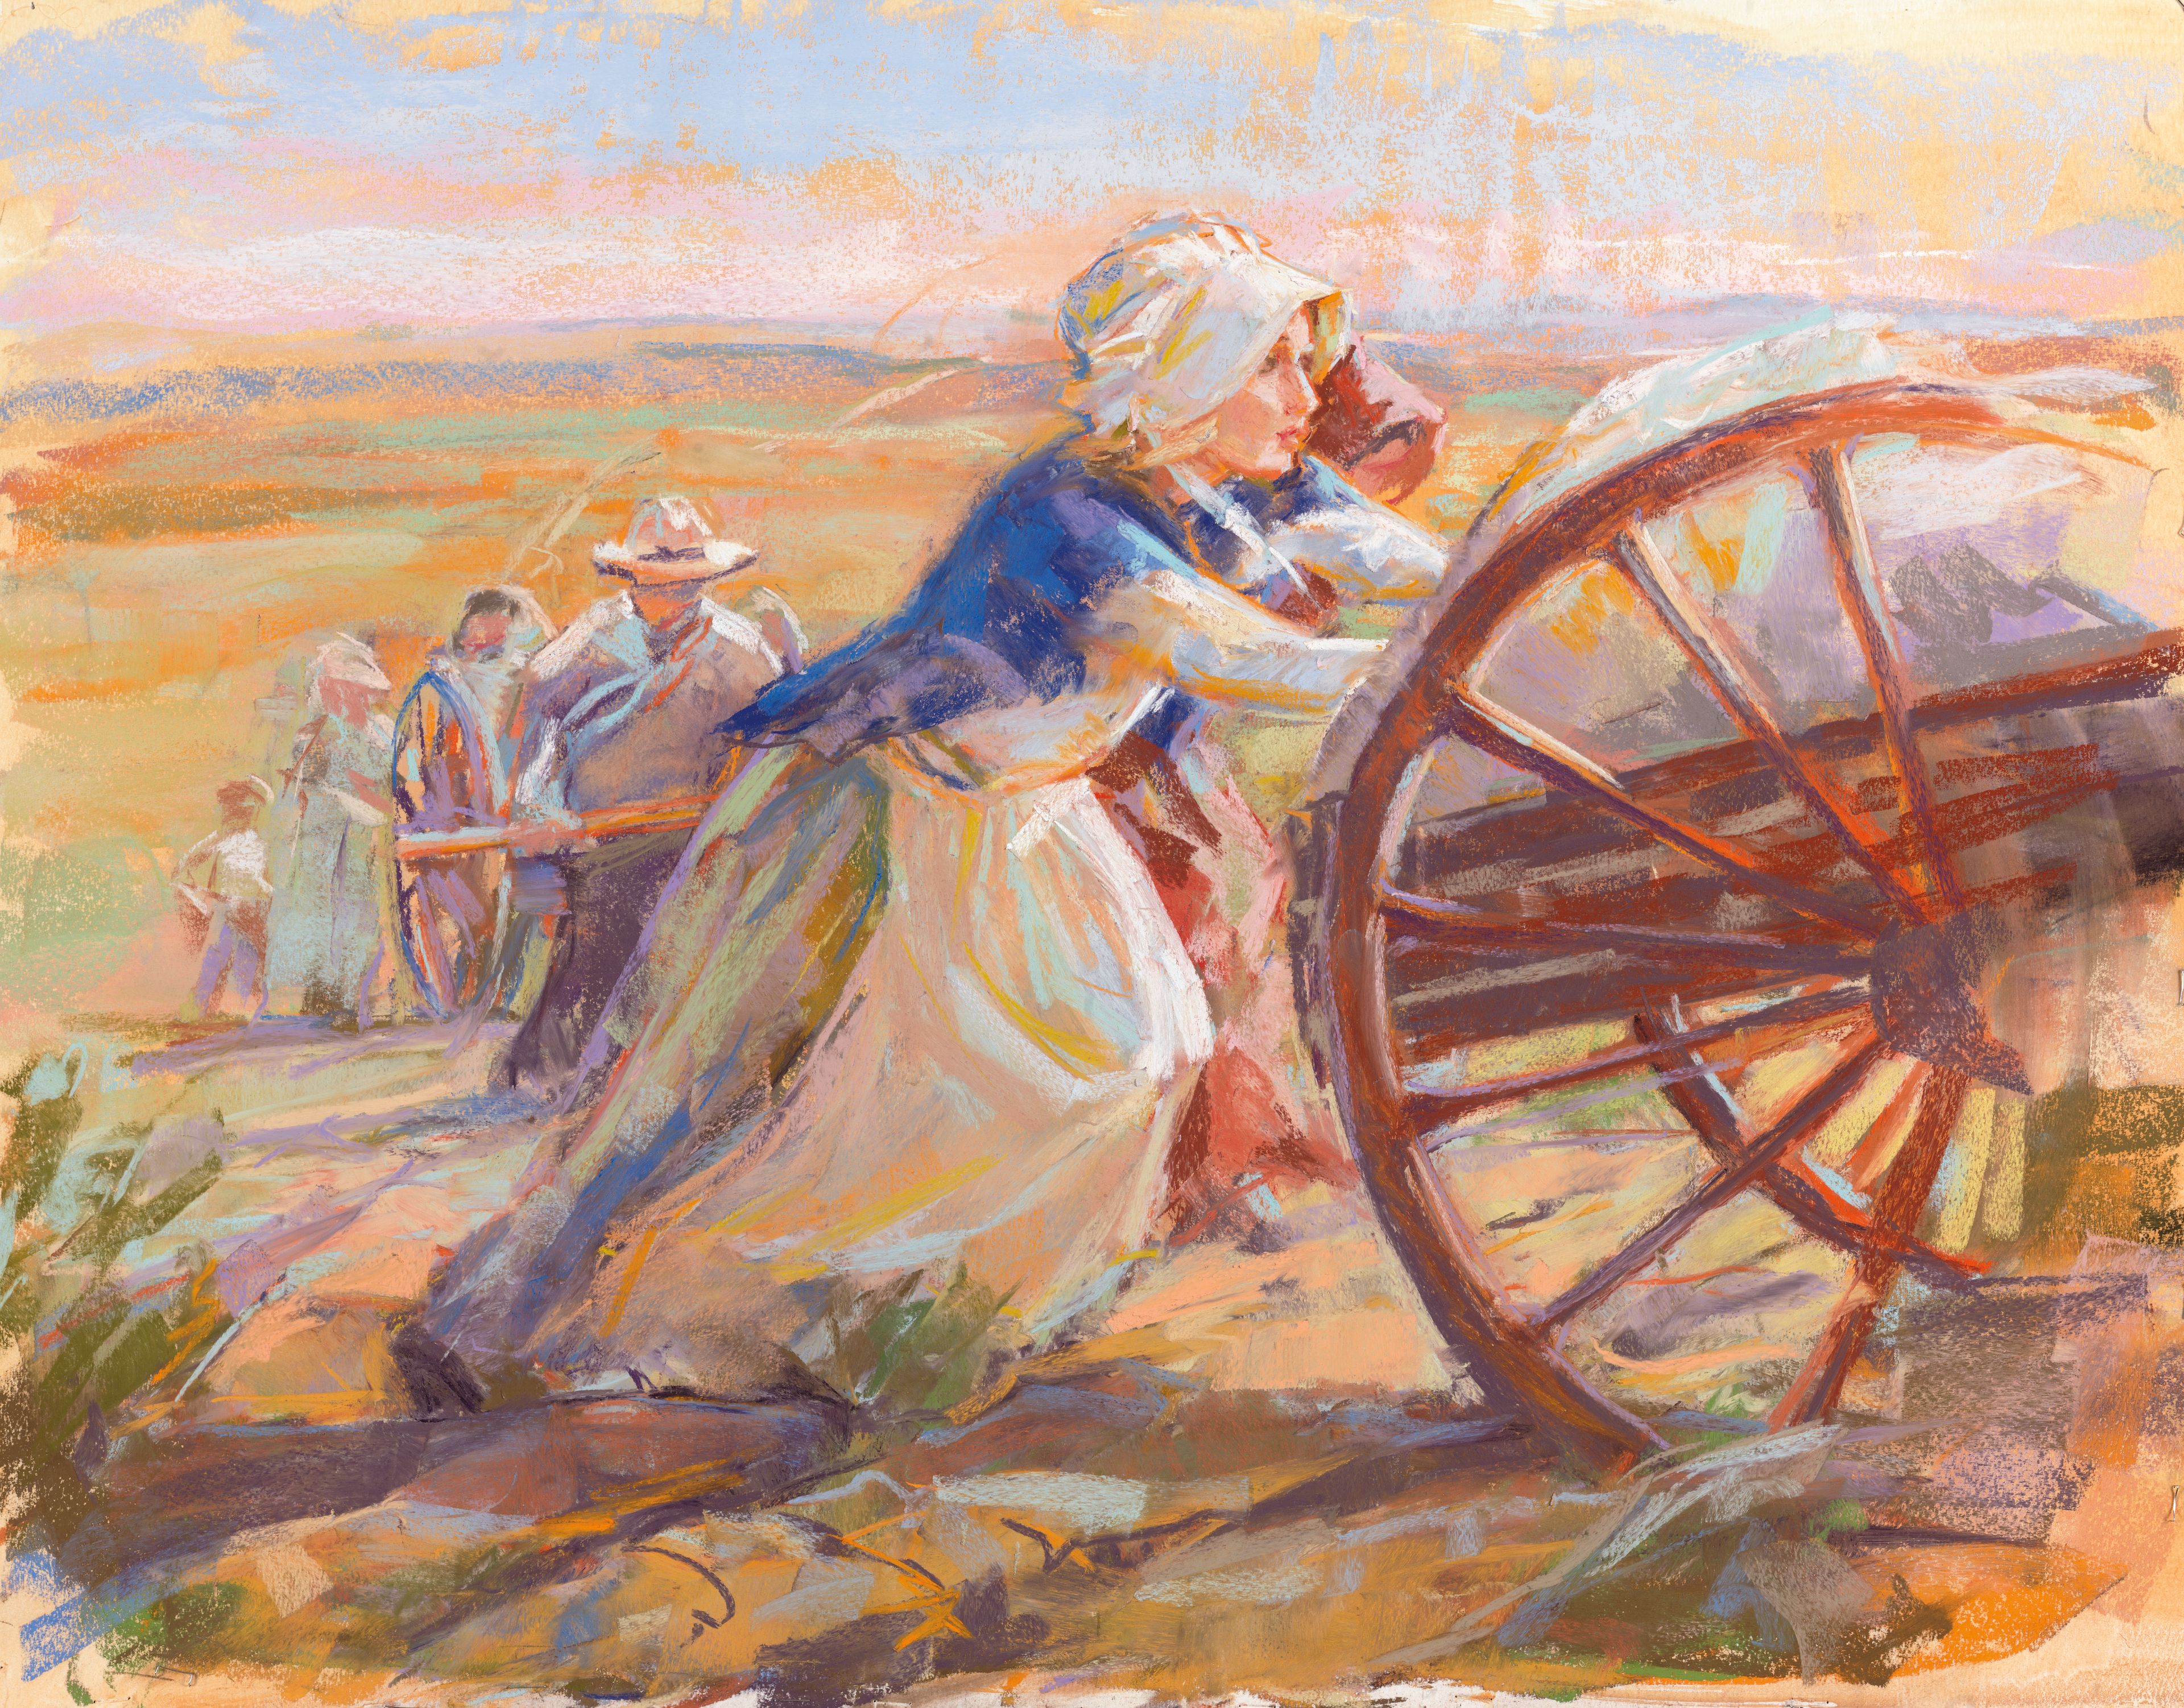 A depiction of pioneer women pushing a handcart, by Julie Rogers.